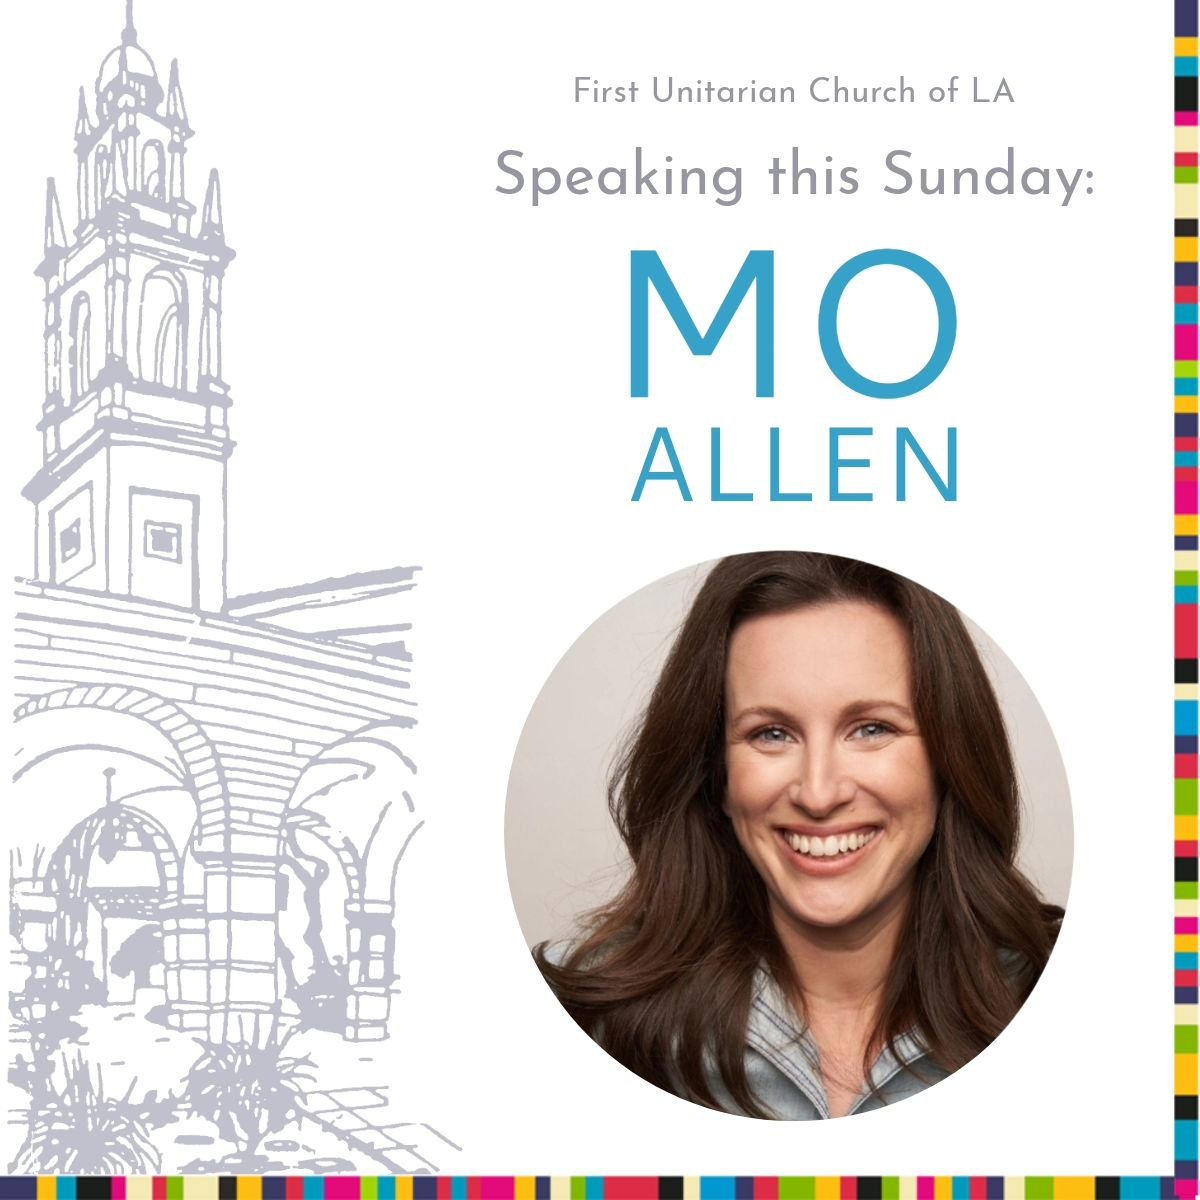 This Sunday we are excited to welcome our own member, Mo Allen, as our speaker! Her talk is titled &quot;And Service Its Gift&quot;. She will explore the gift of service as a spiritual practice and the many ways in which this church provides. 

Join 